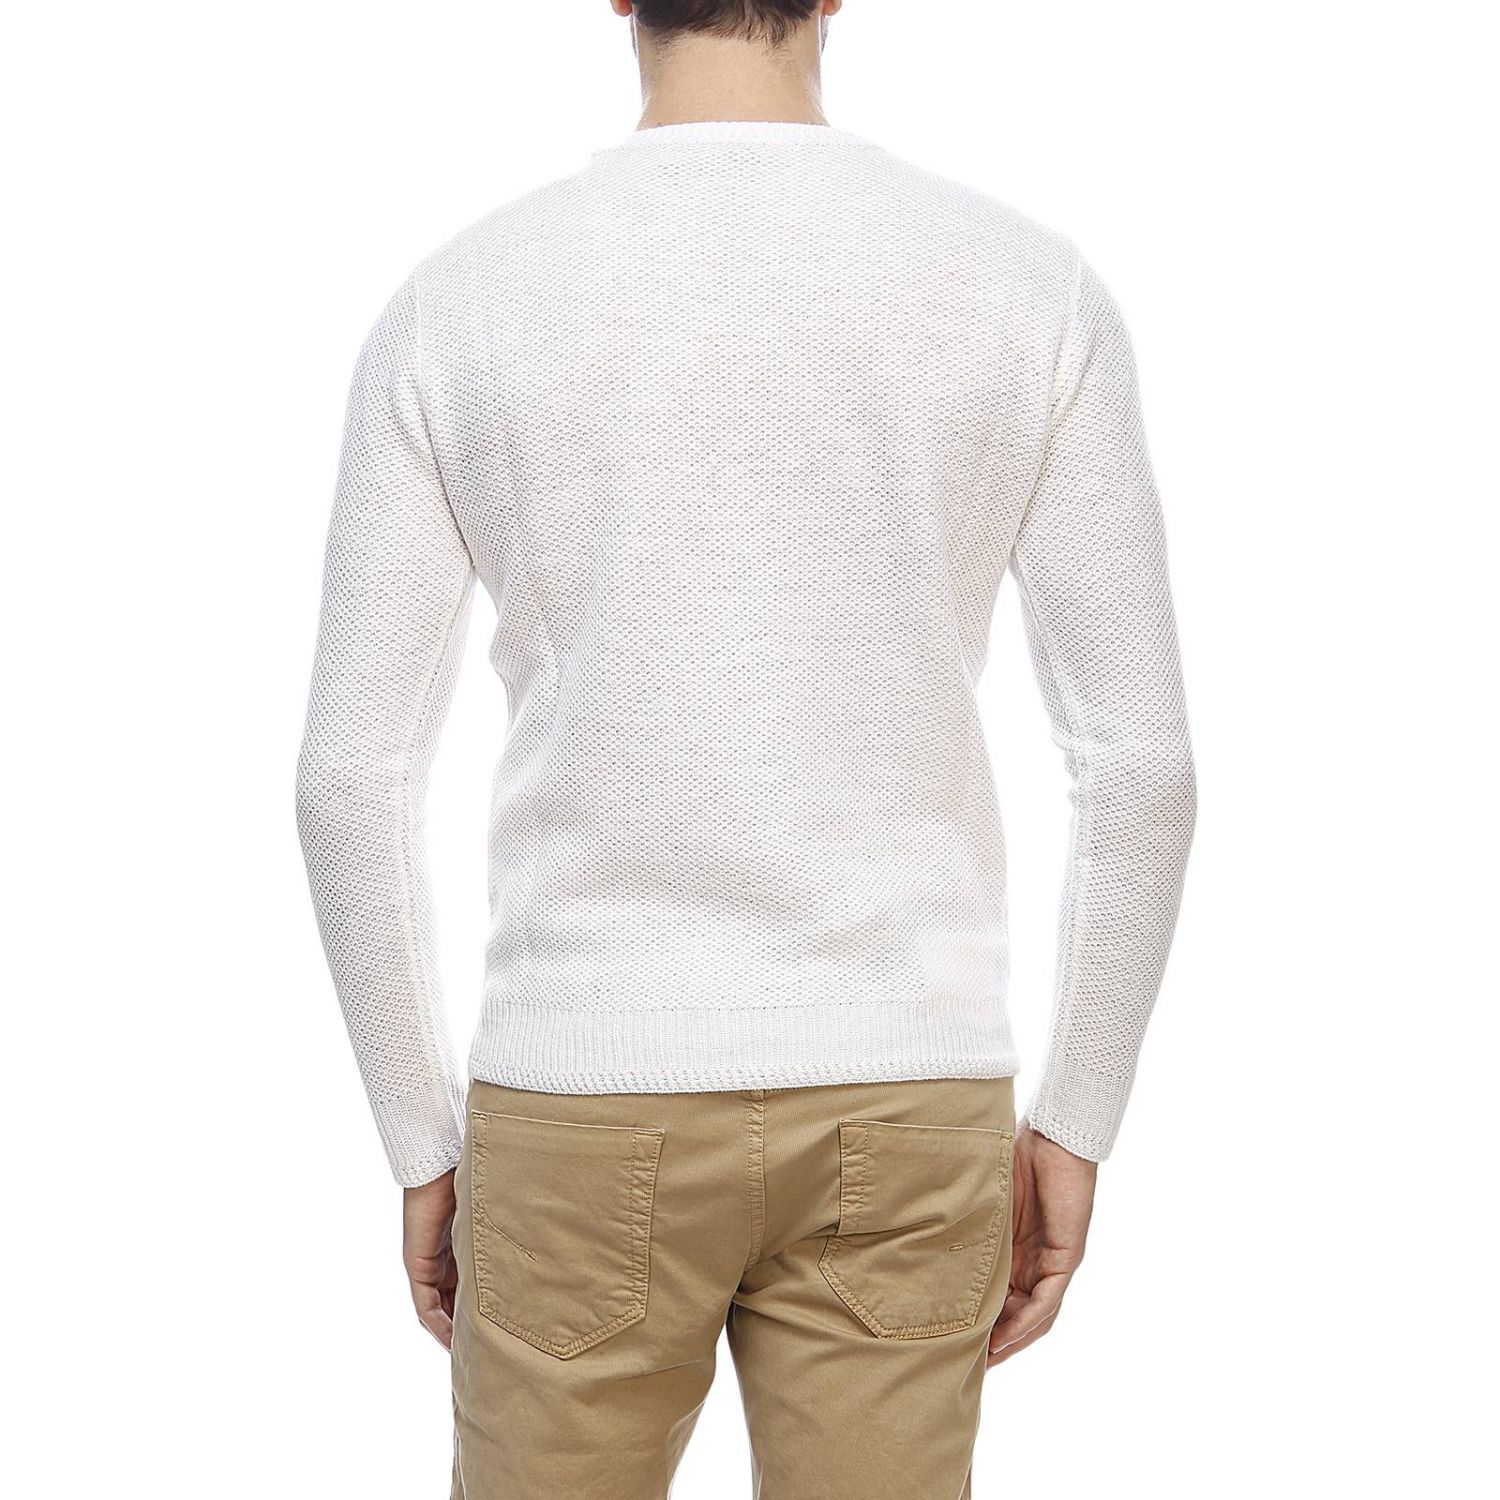 Isaia Outlet: sweater for man - White | Isaia sweater MG7650 Y0229 ...